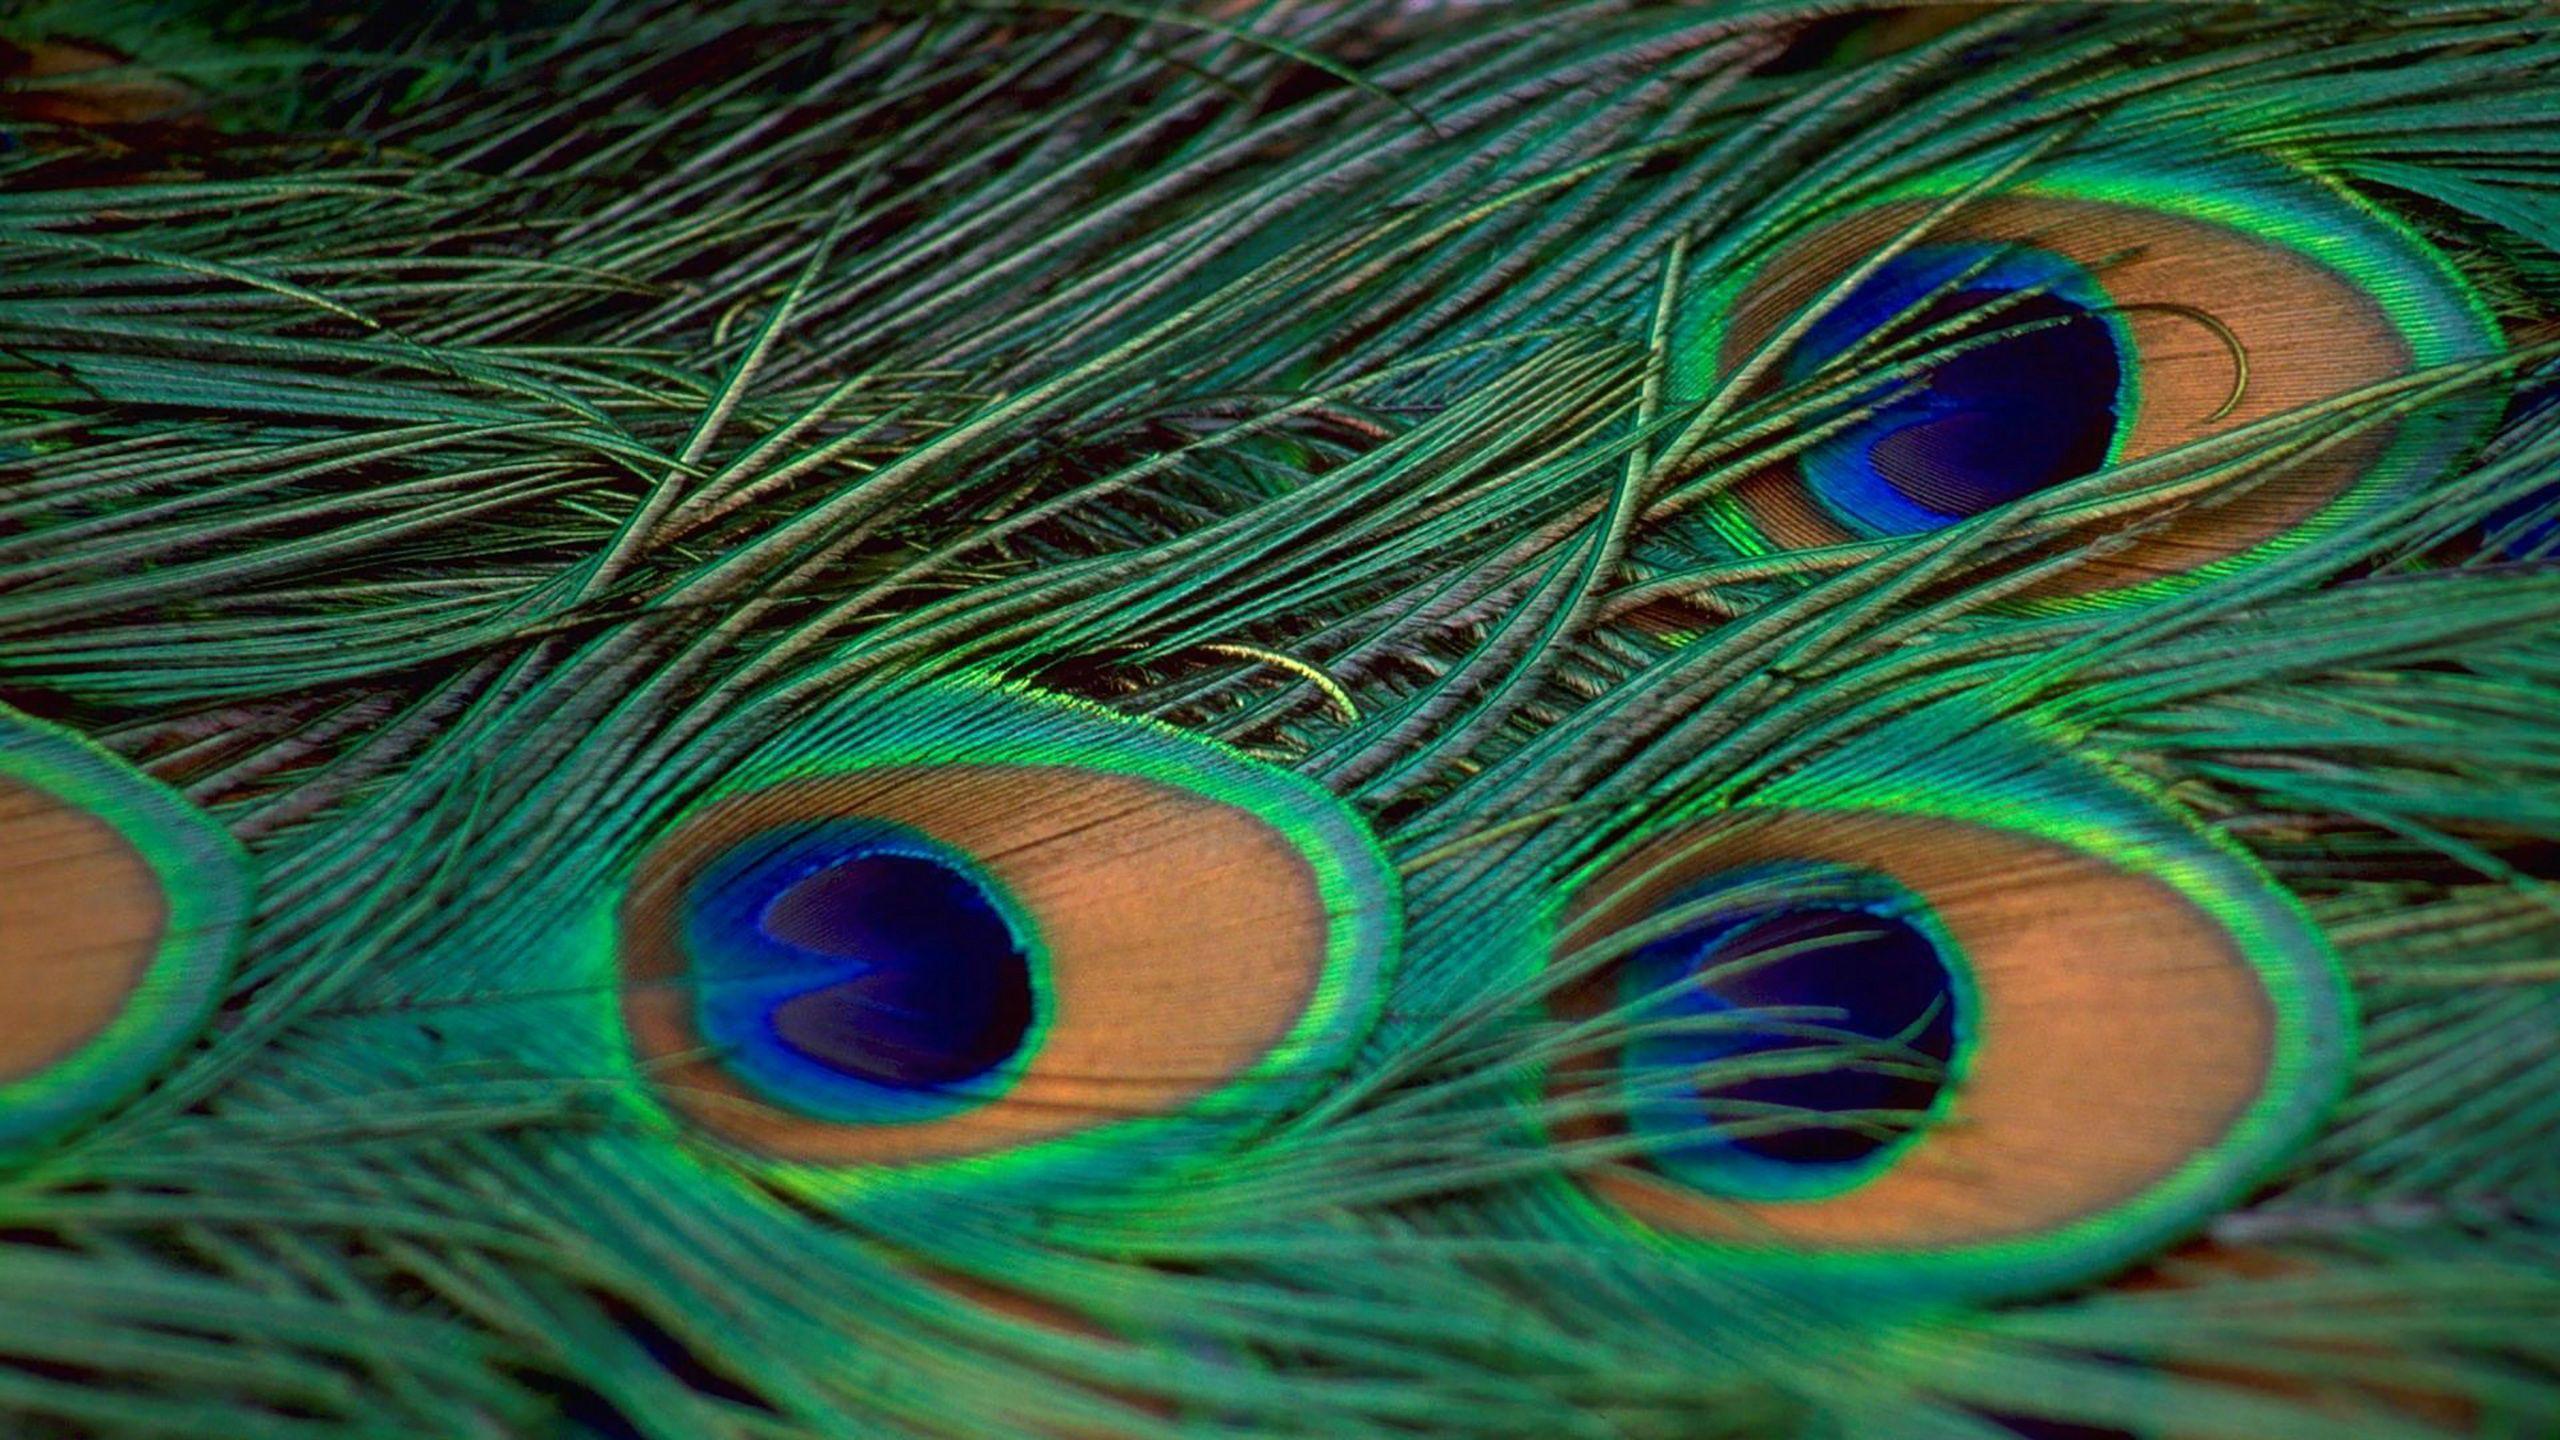 Peacock Feather Full HD Wallpaper